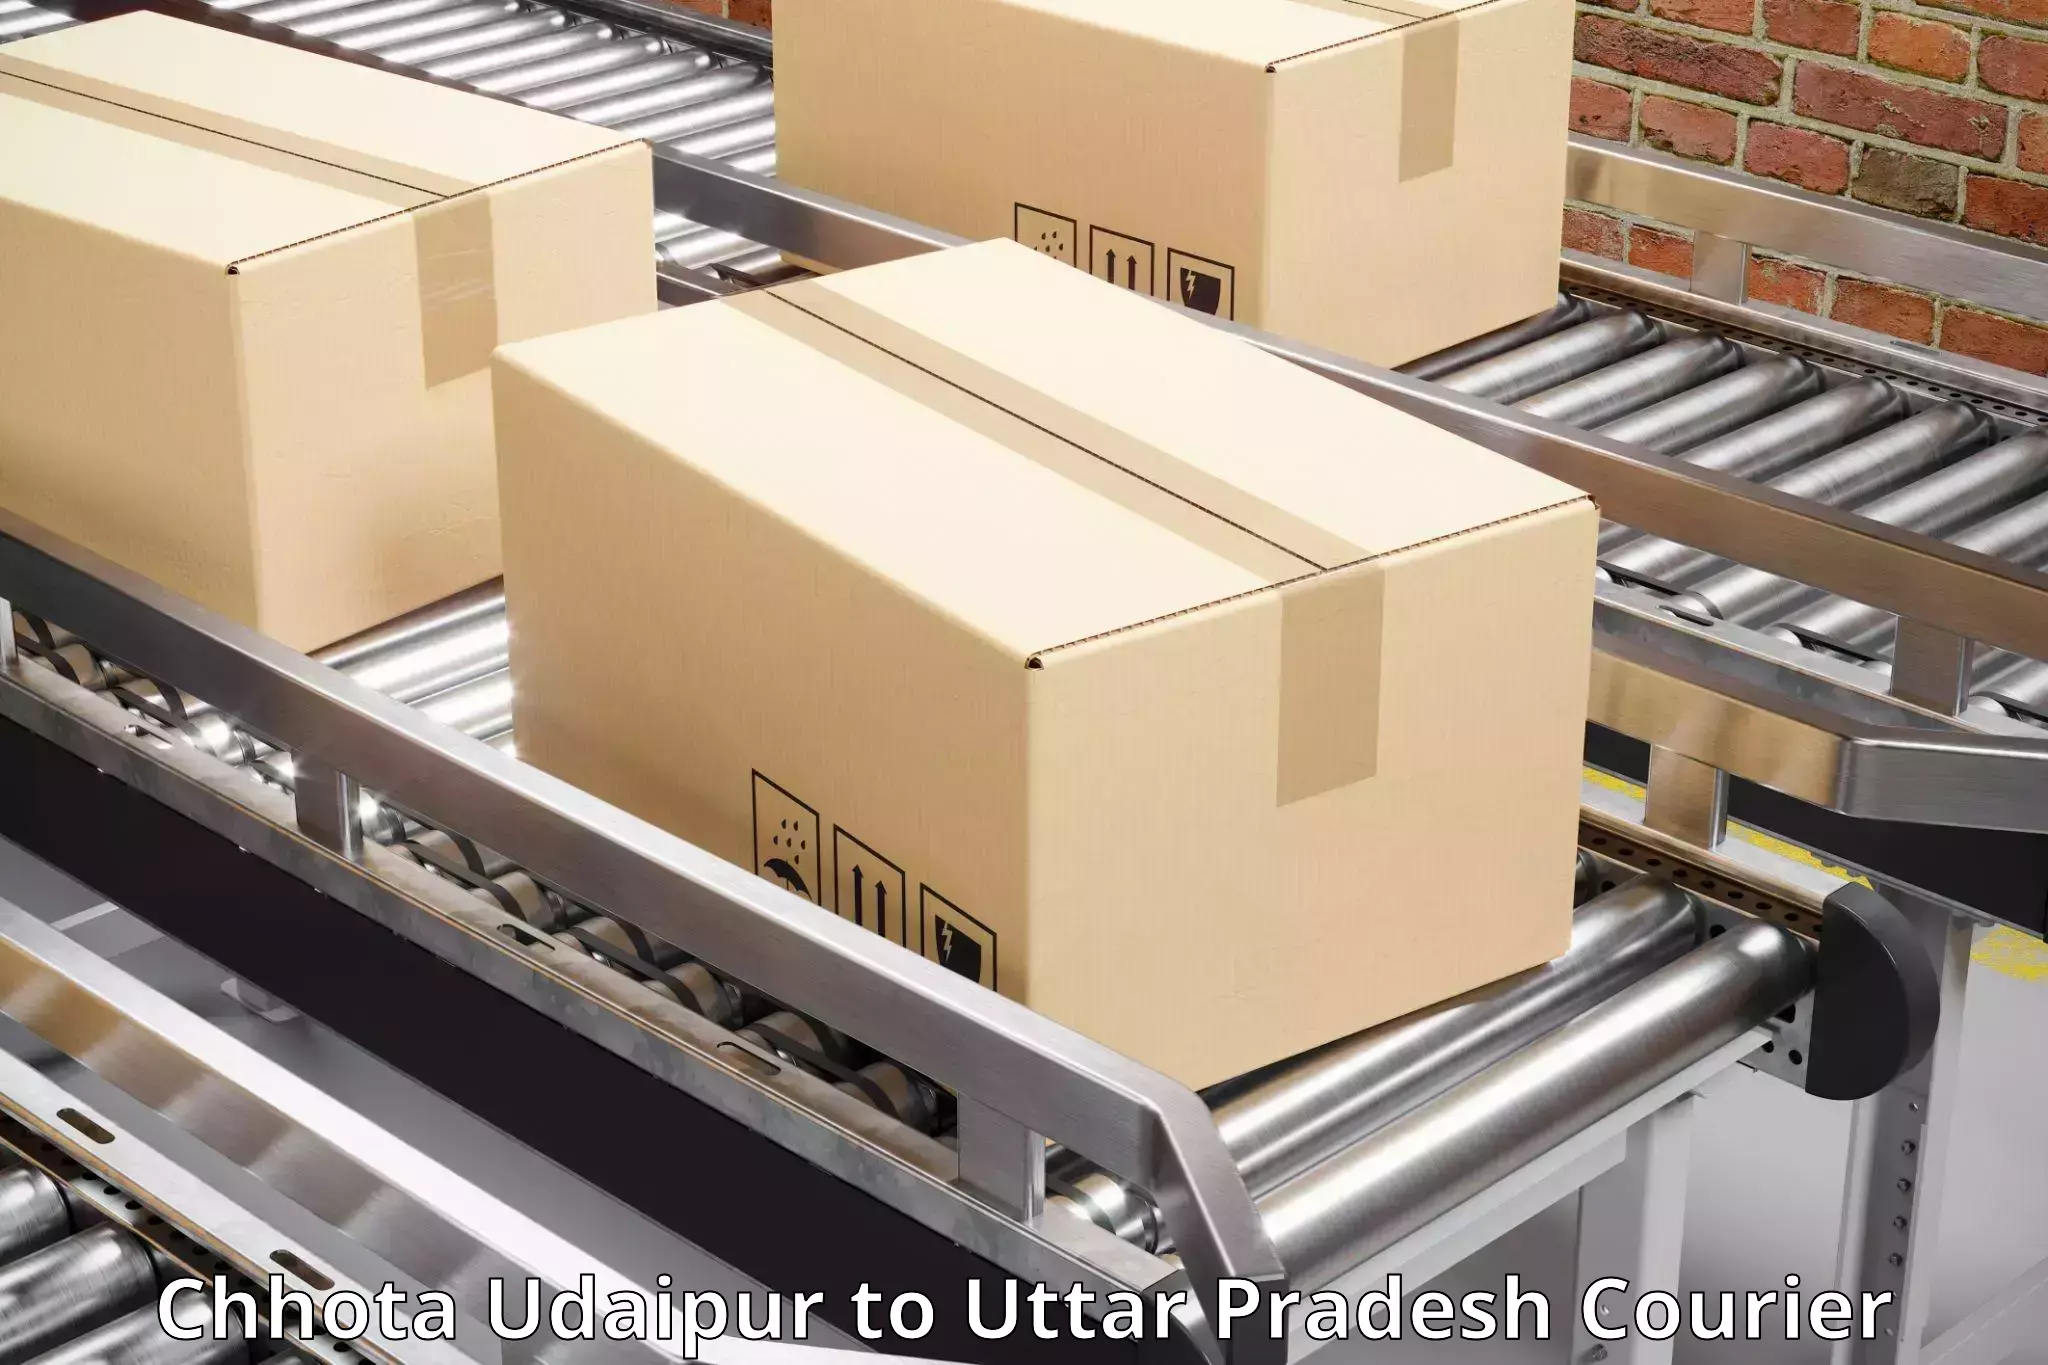 Online courier booking Chhota Udaipur to Varanasi